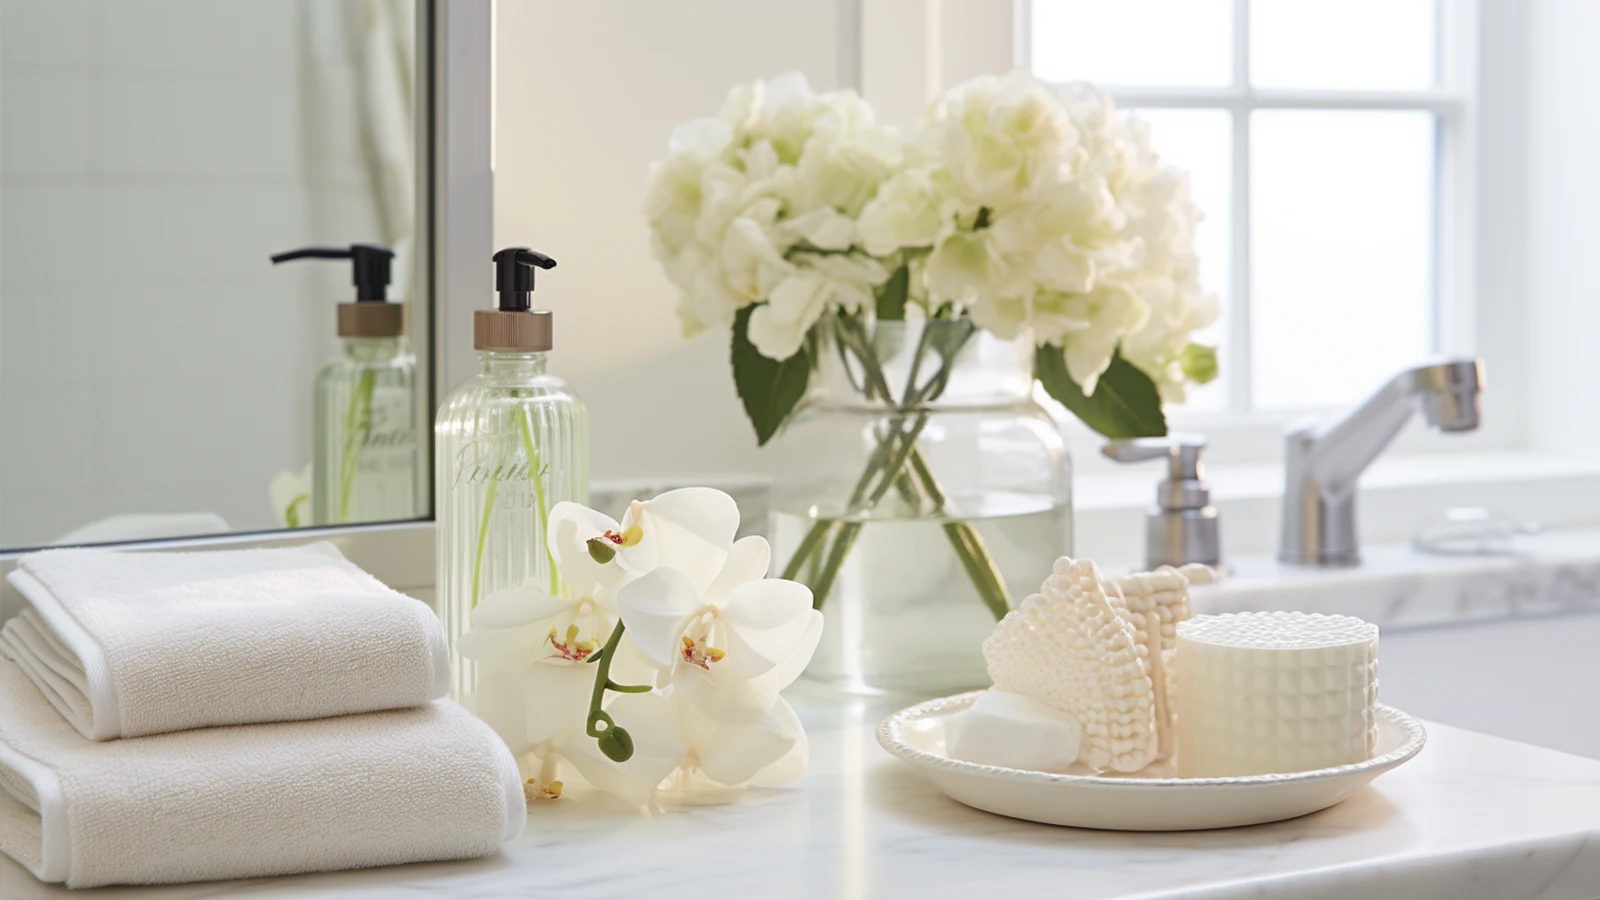 Small bathroom counter decorating ideas: a bathroom with white towels, soap, and a mirror.